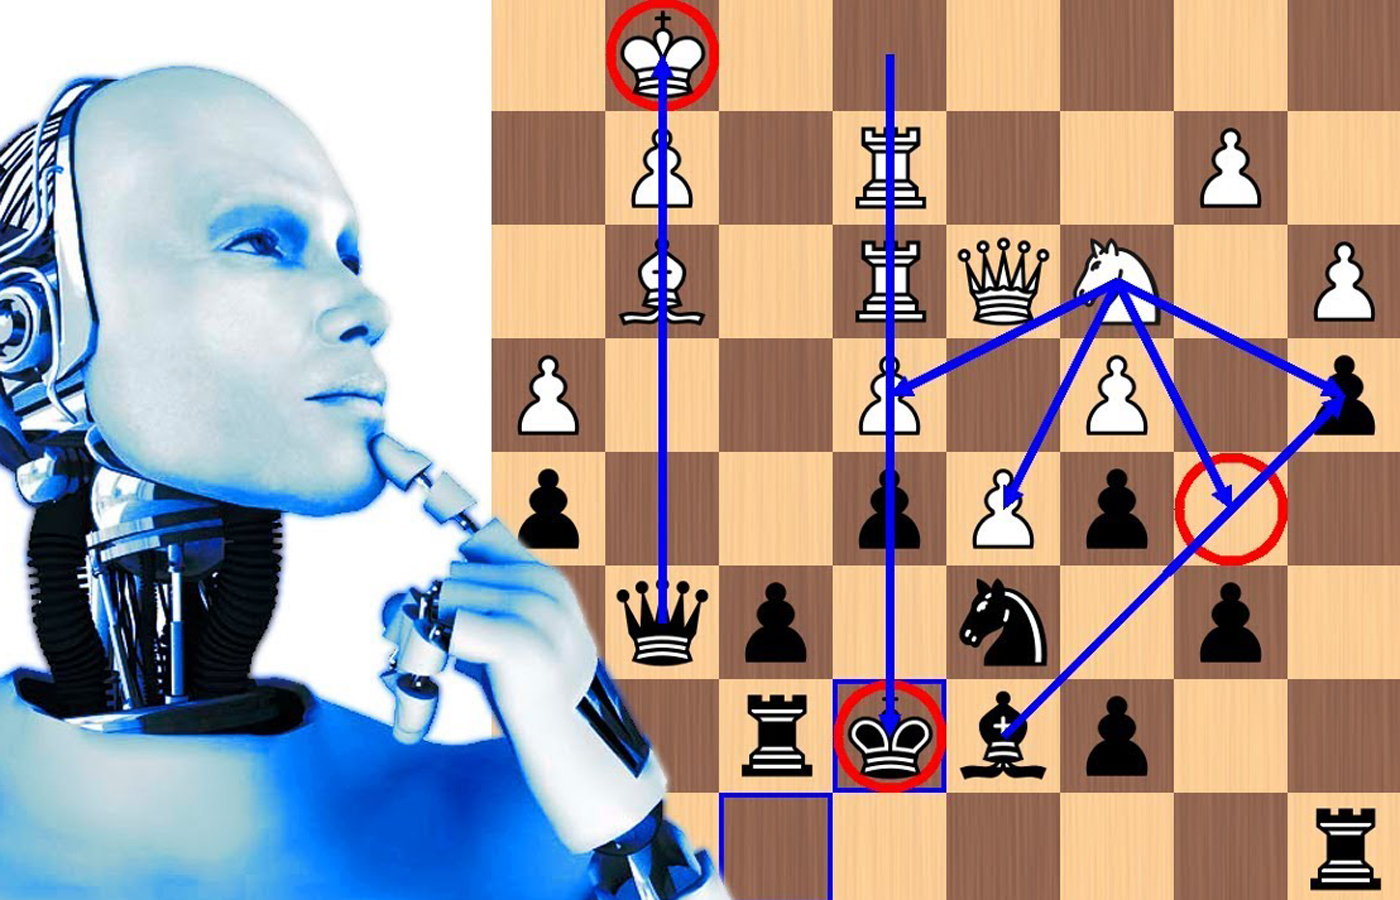 Why Artificial Intelligence Like AlphaZero Has Trouble With the